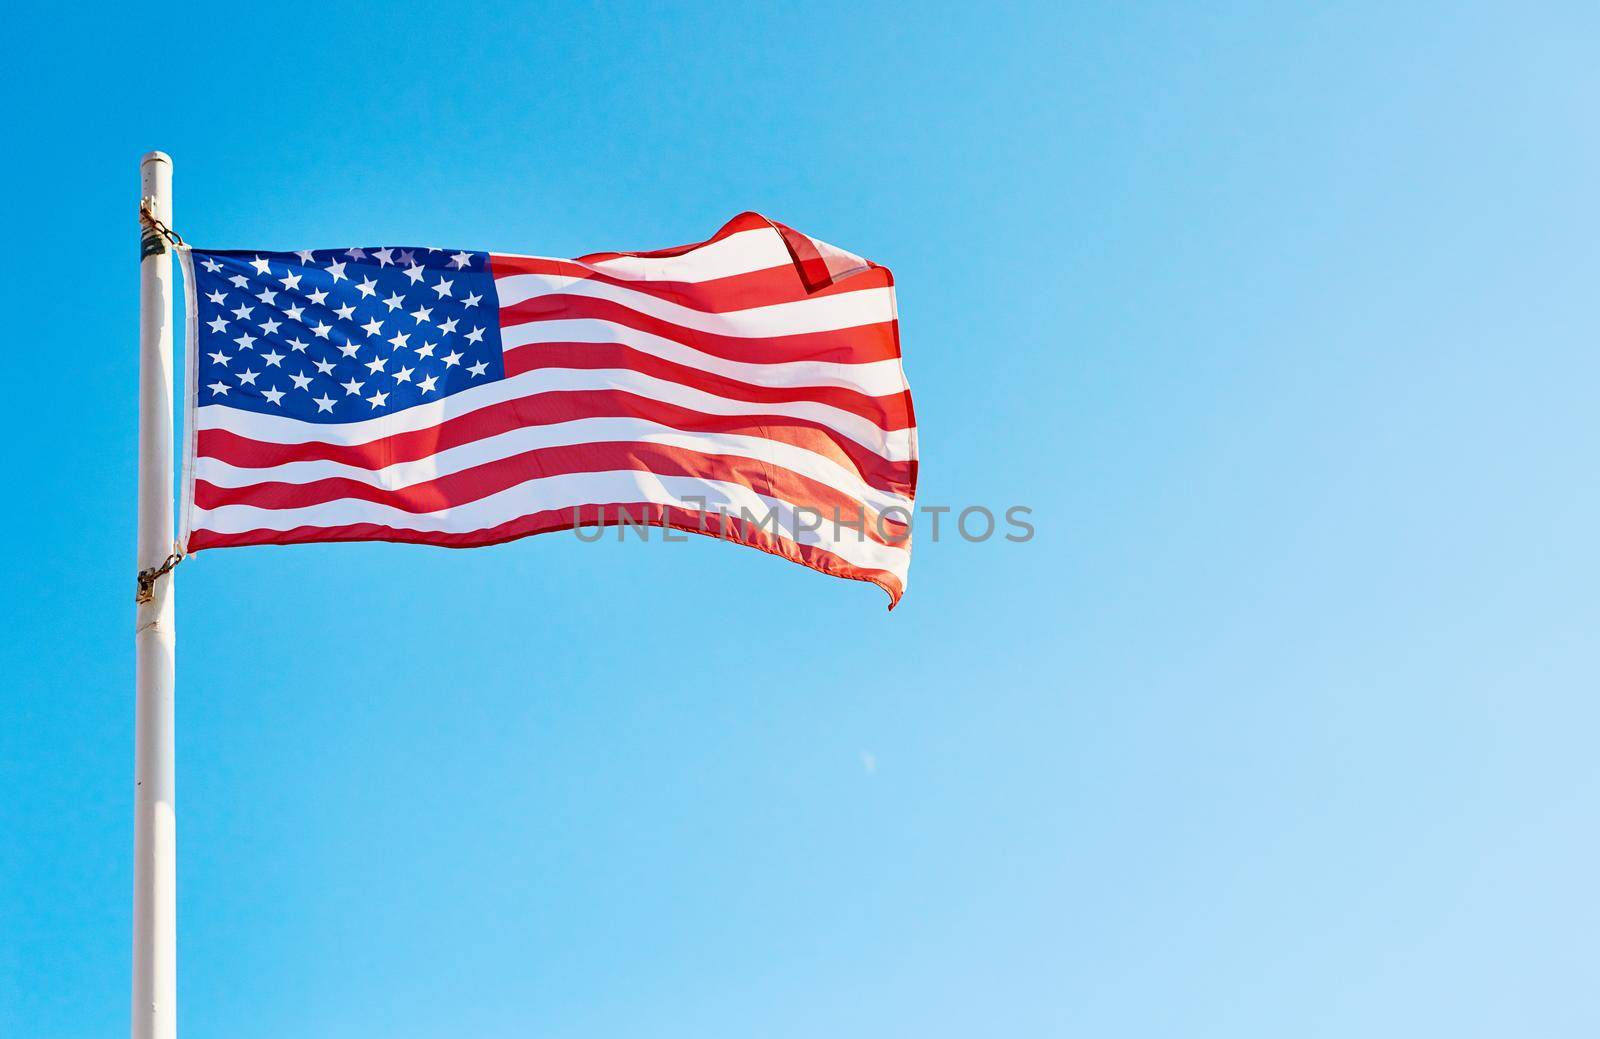 Low angle shot of the American flag standing on its own outside during the day.